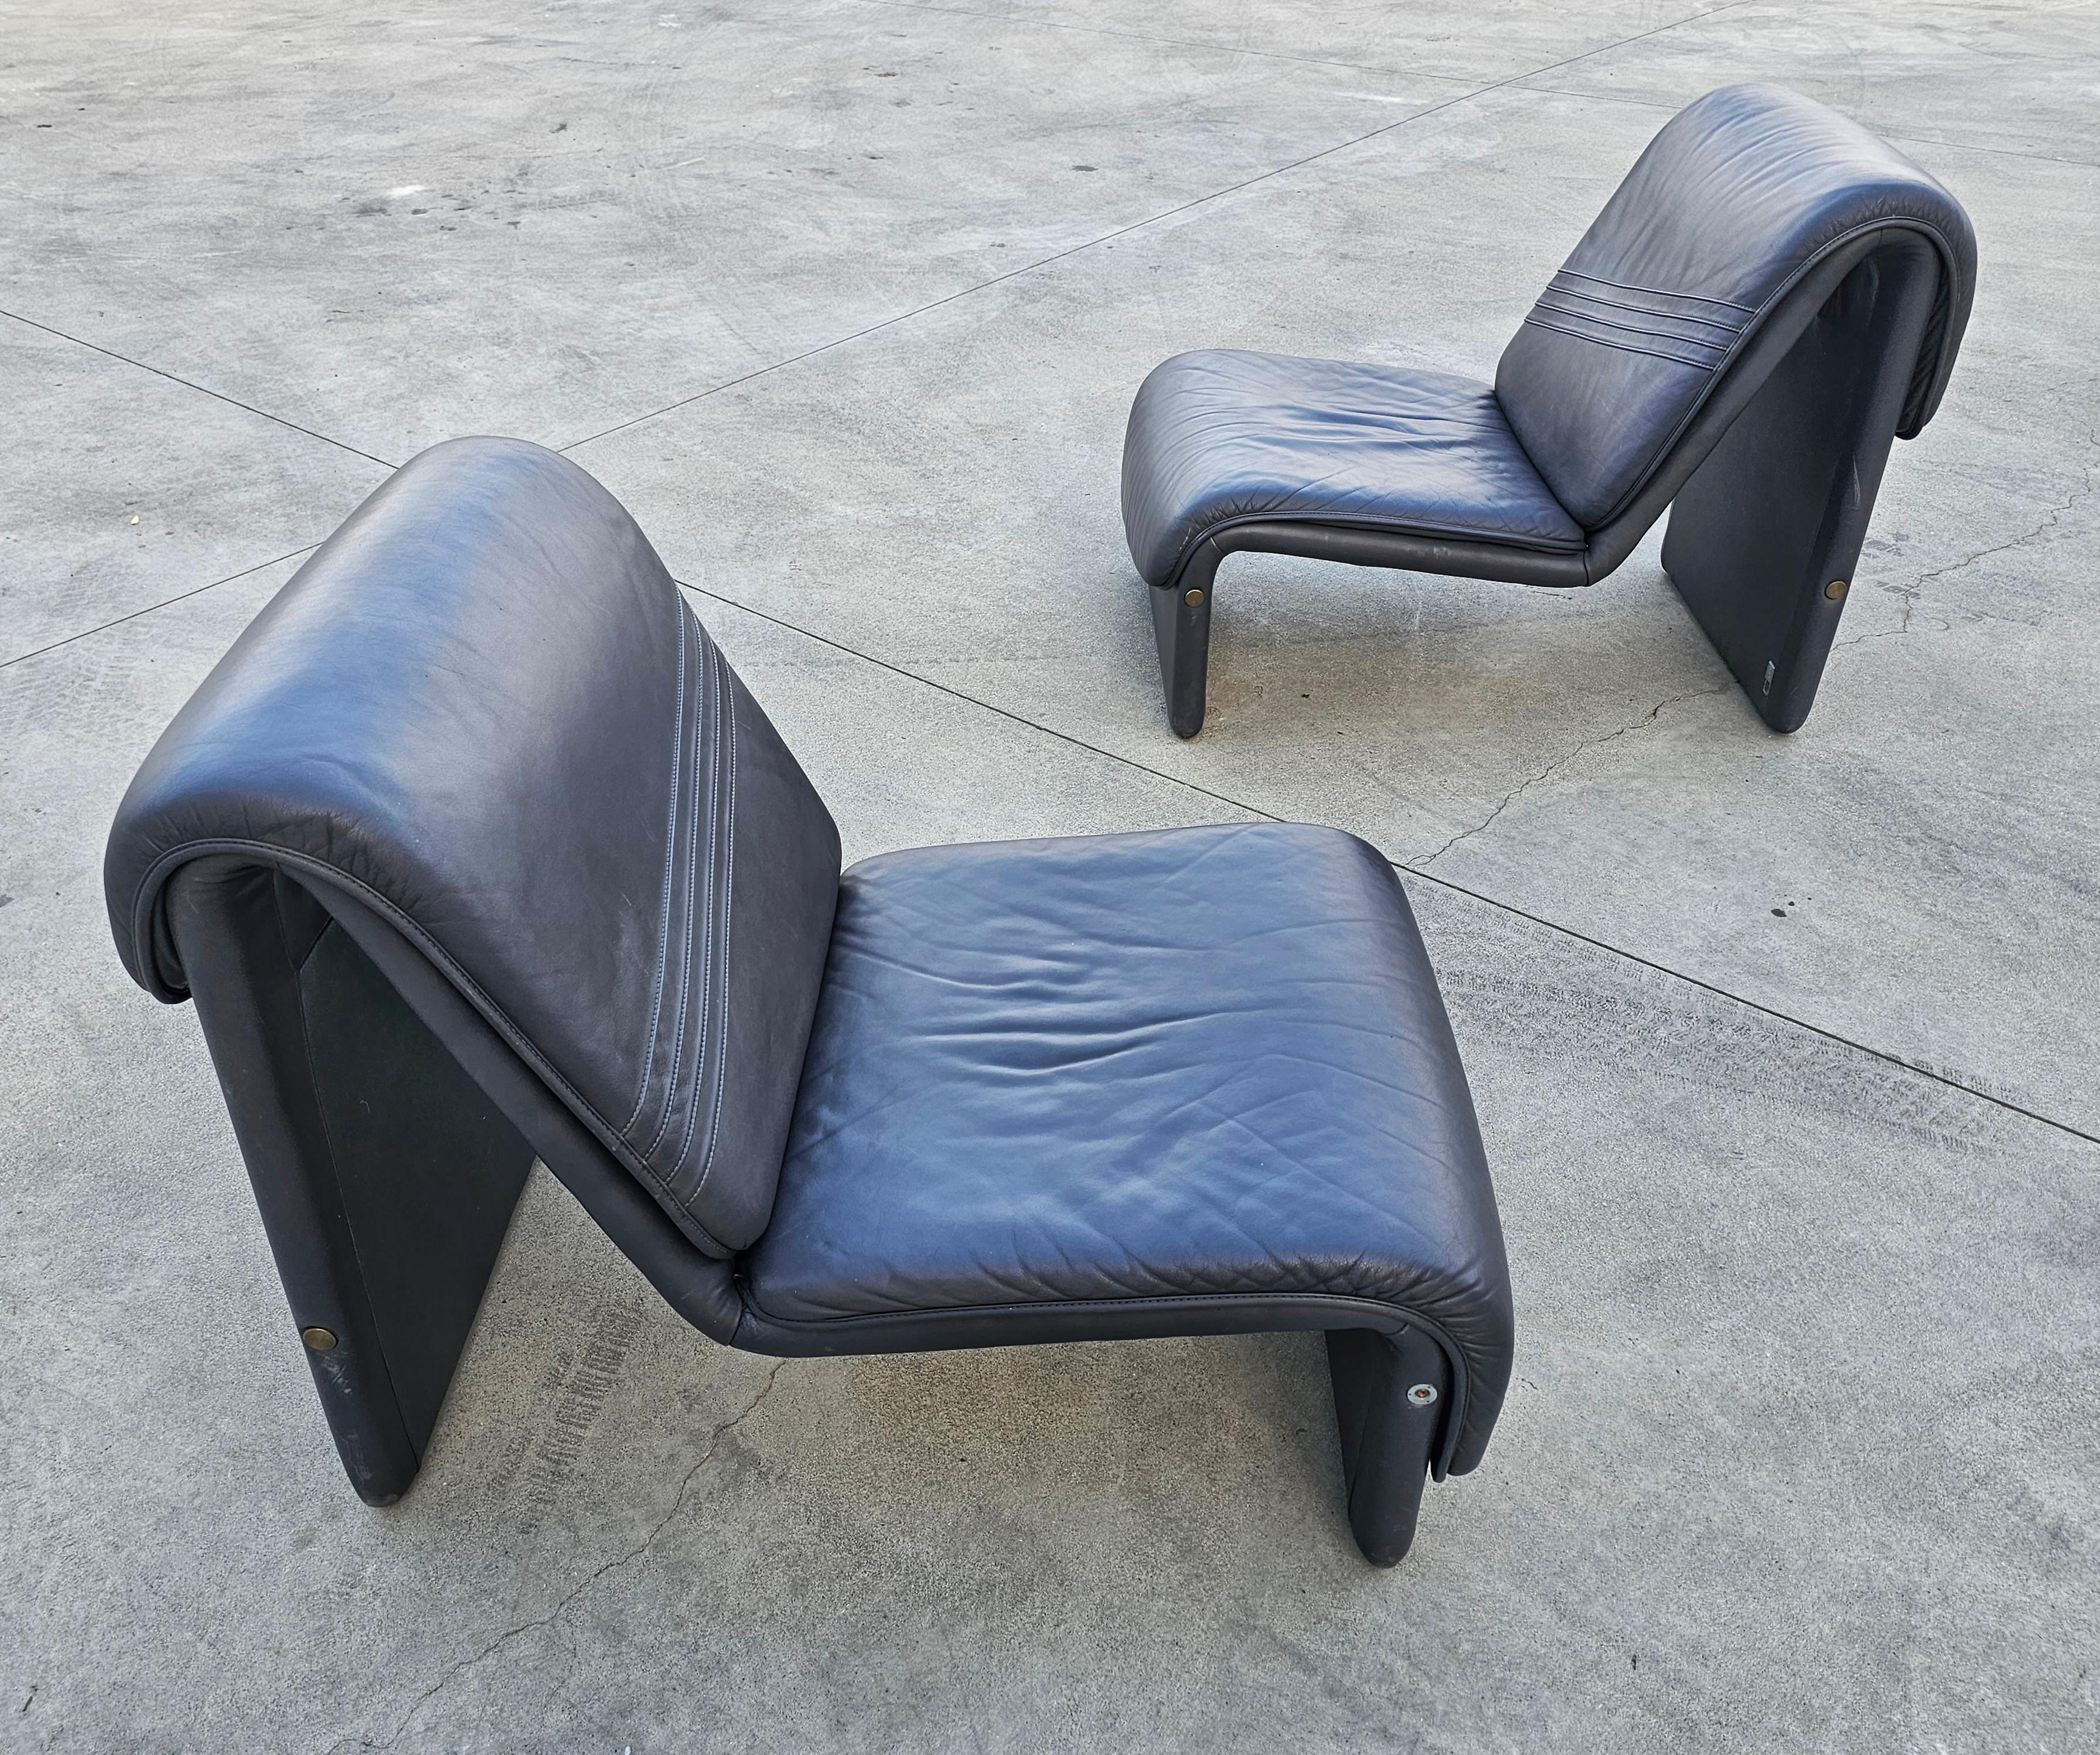 In this listing you will find a pair of postmodern lounge chairs made in Etienne Fermigier style, featuring minimal profile and attractive curved aesthetic. These chairs were manufactured by Swiss Seats, with manufacturer's plates still attached to